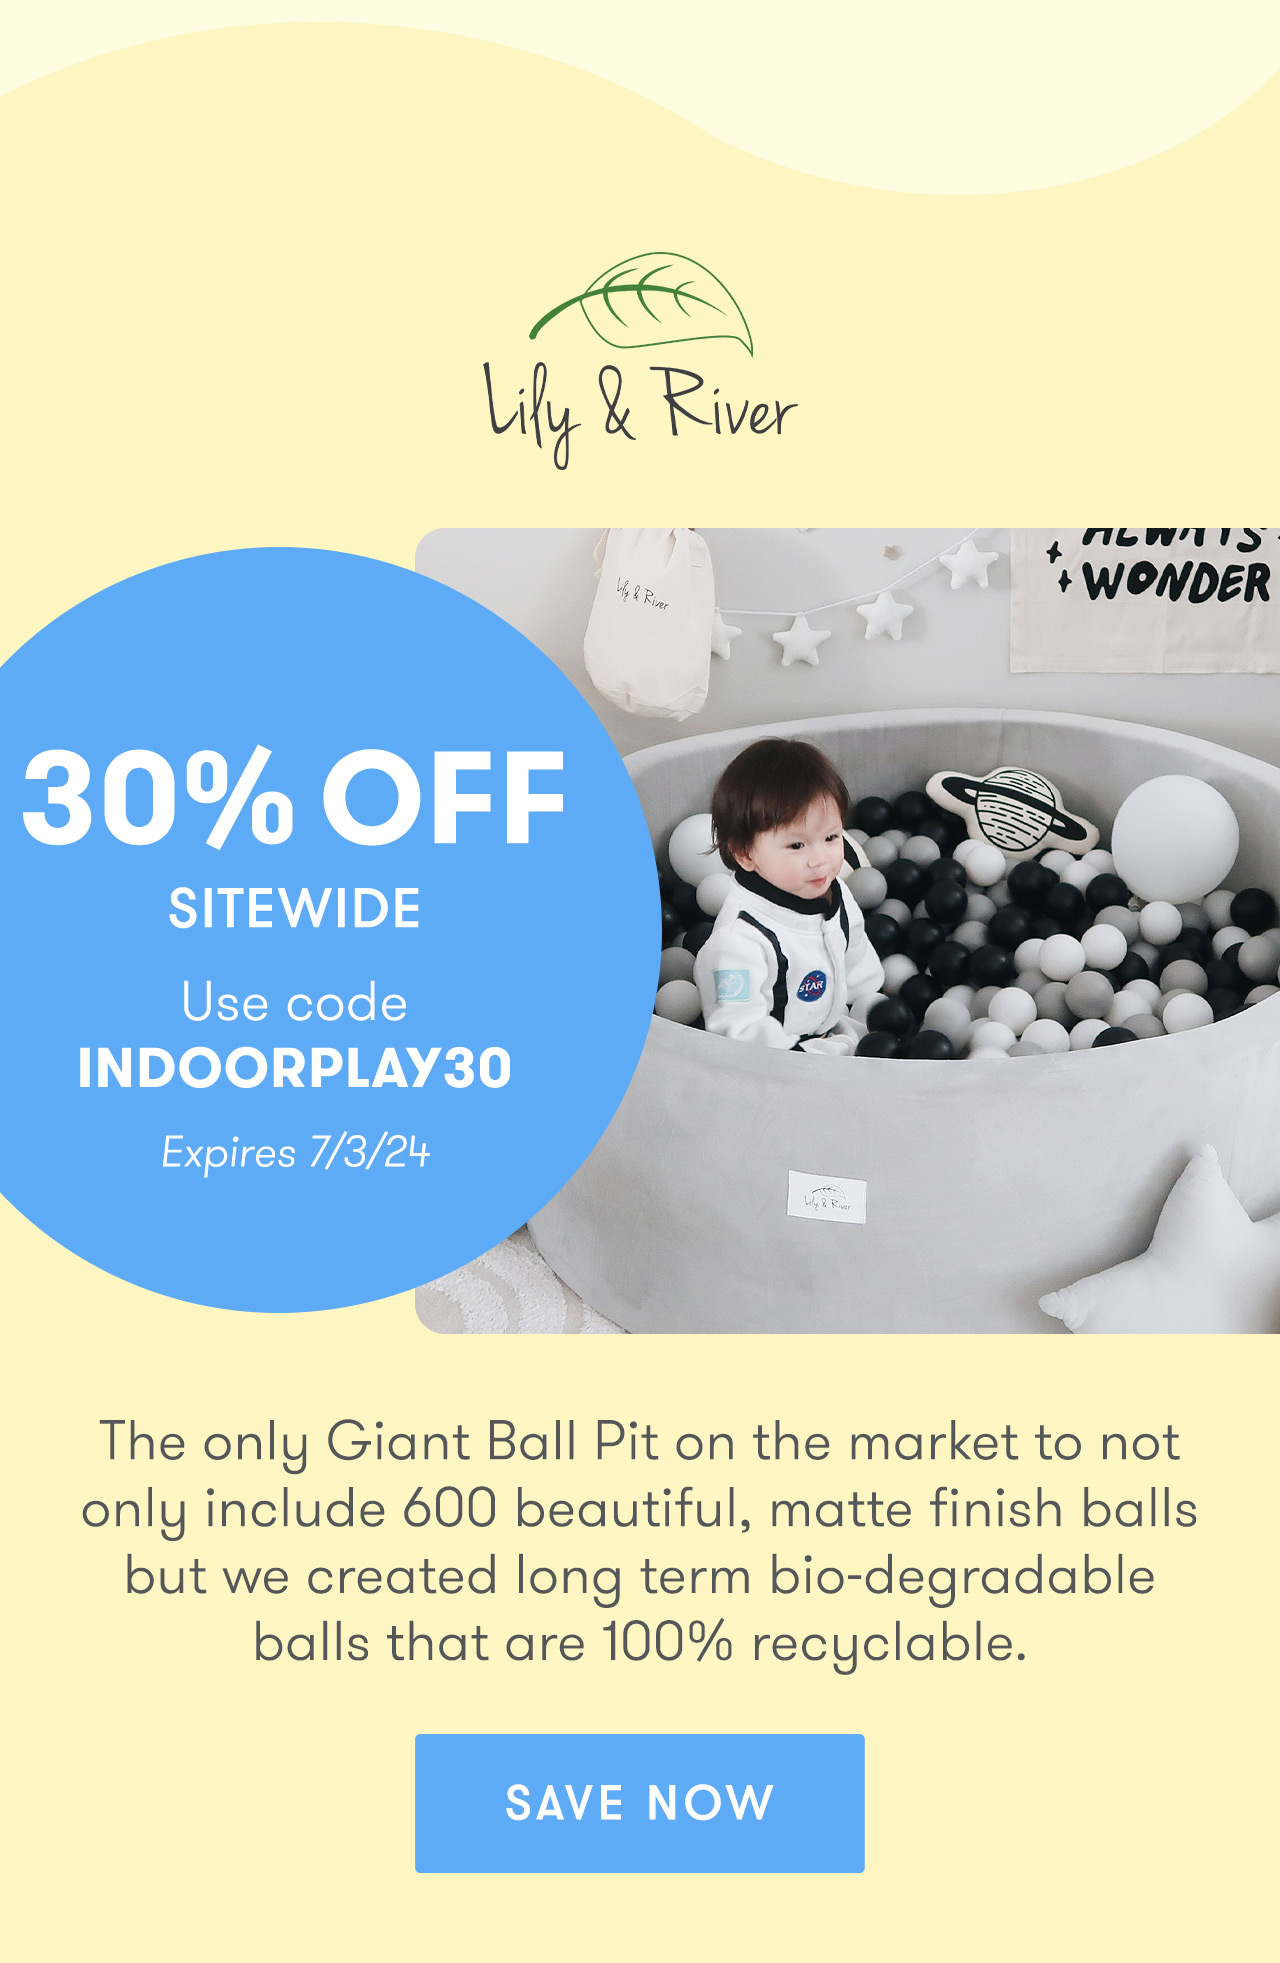 Lily & River: Take 30% off sitewide with code INDOORPLAY30